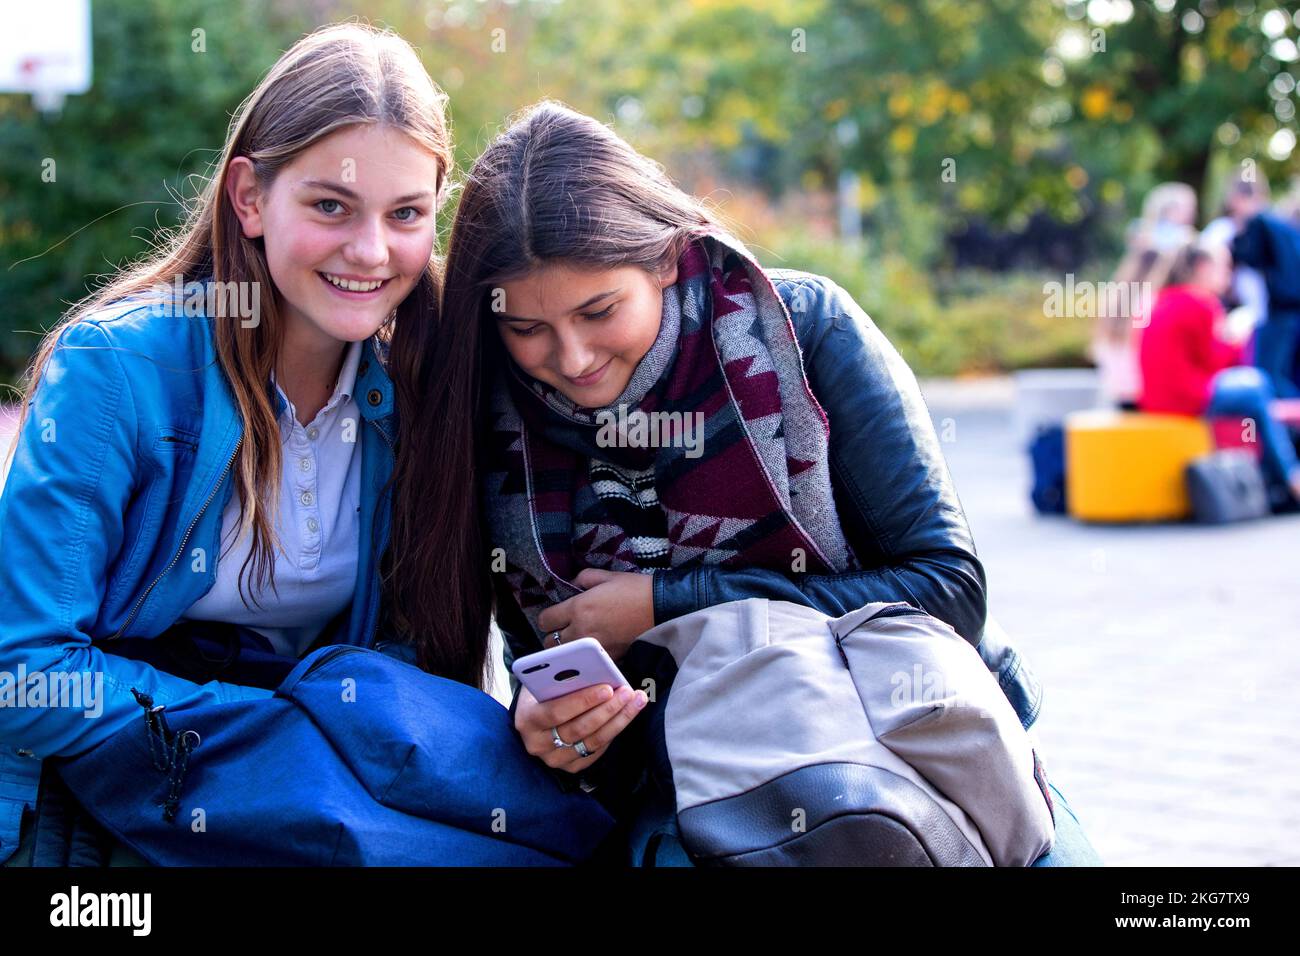 Two students on a secondary school looking at her mobile phone. Holland. vvbvanbree fotografie Stock Photo